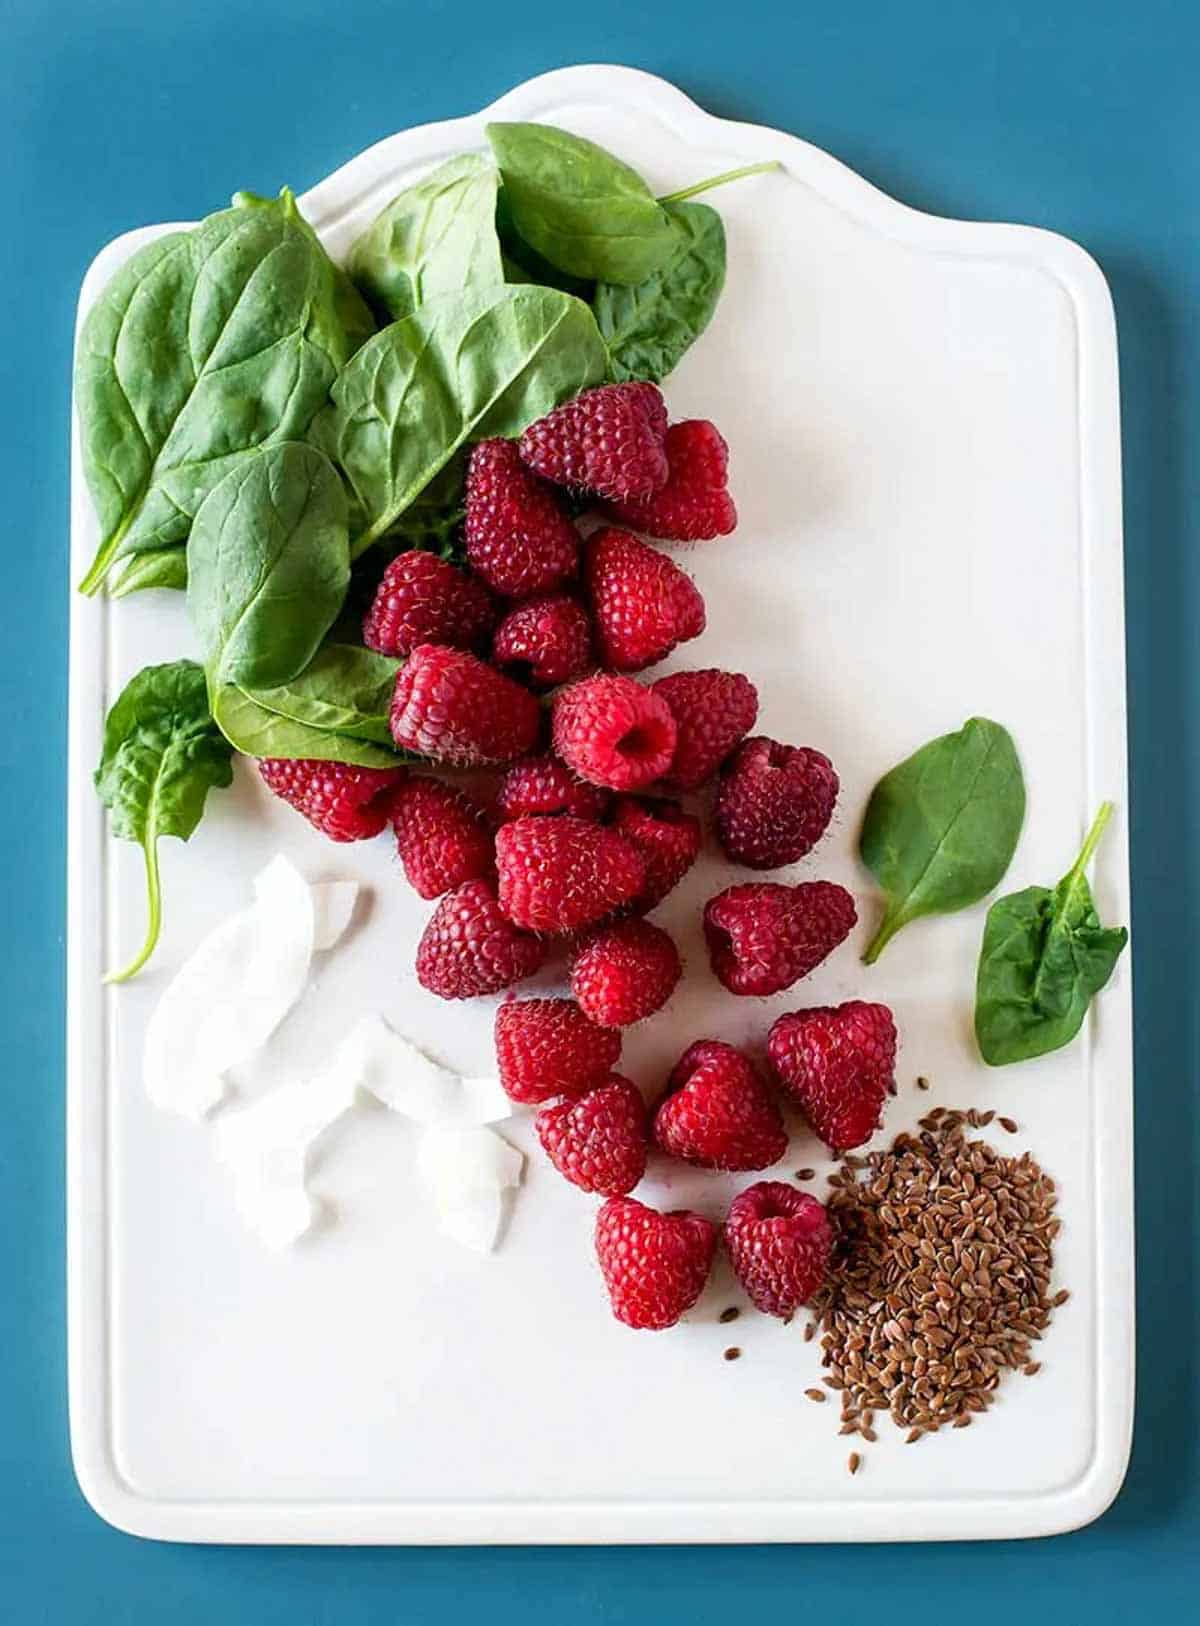 Whole food ingredients for smoothies